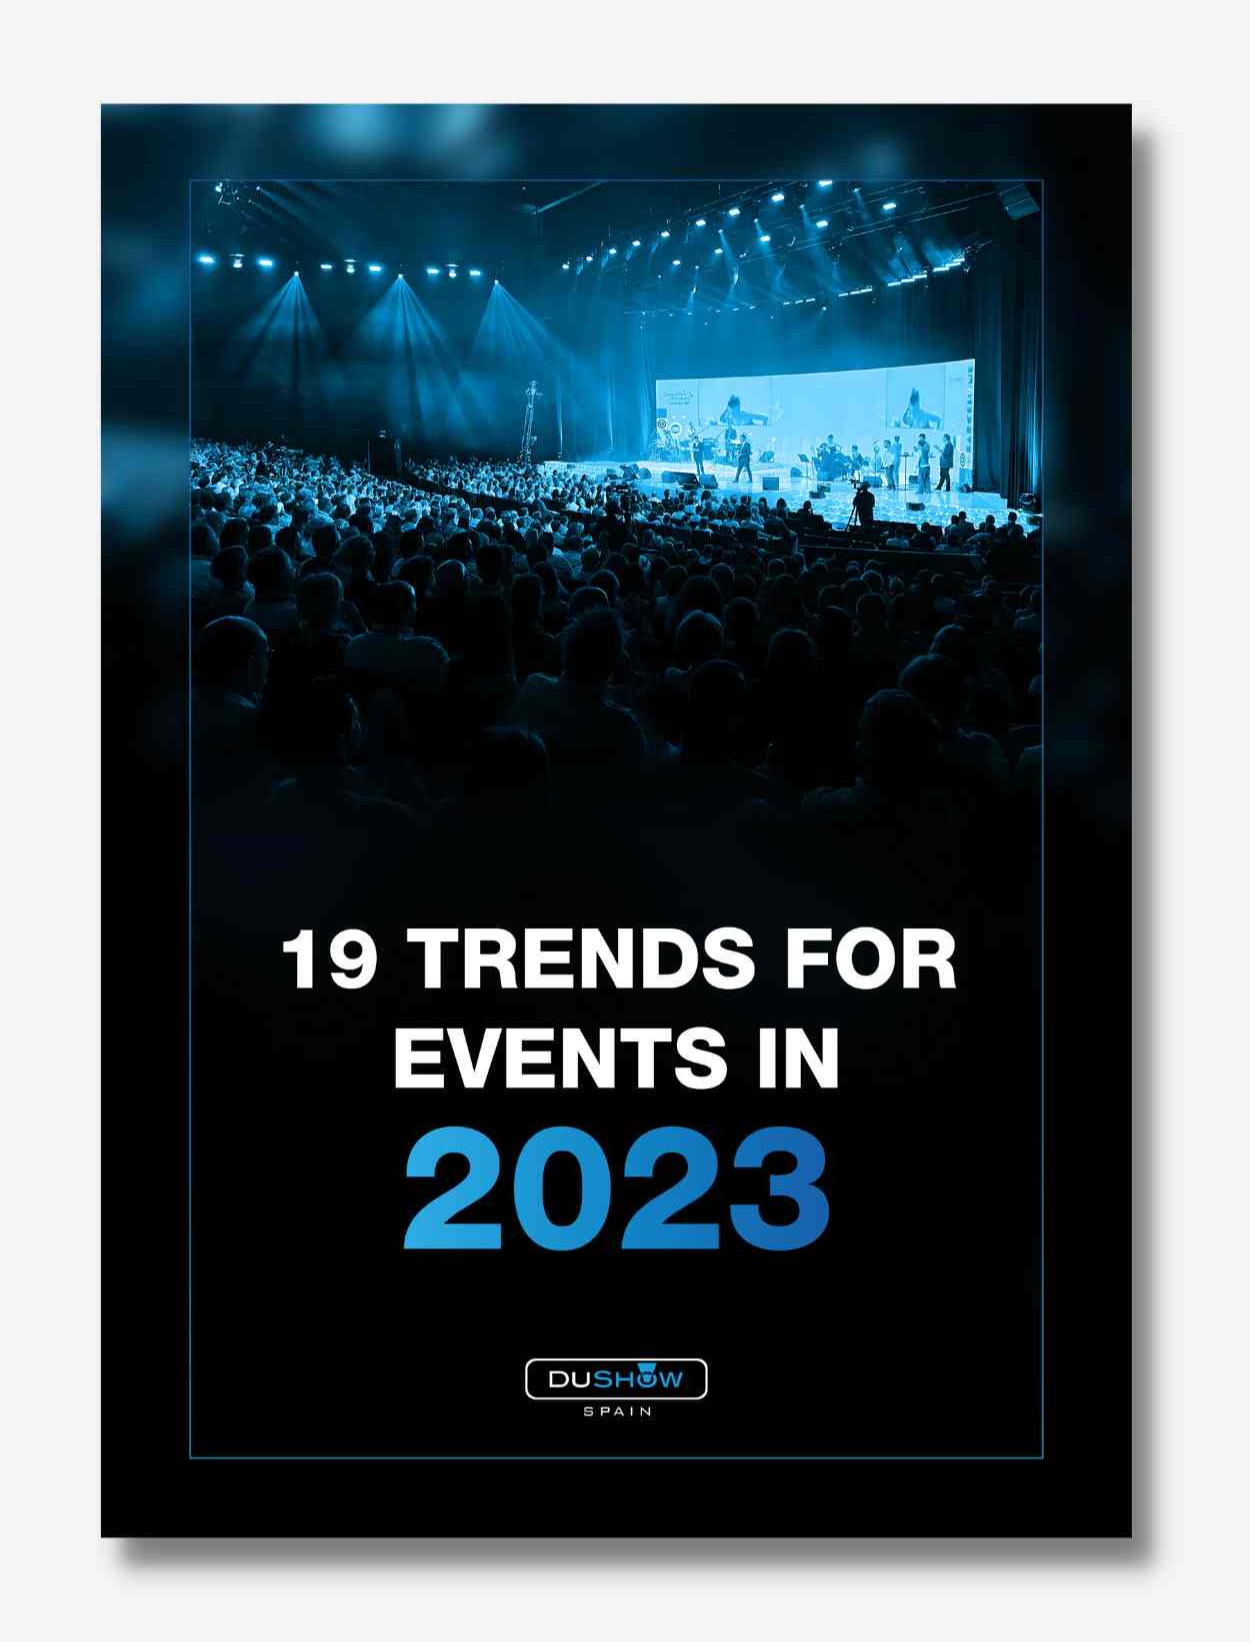 19 trends for events in 2023